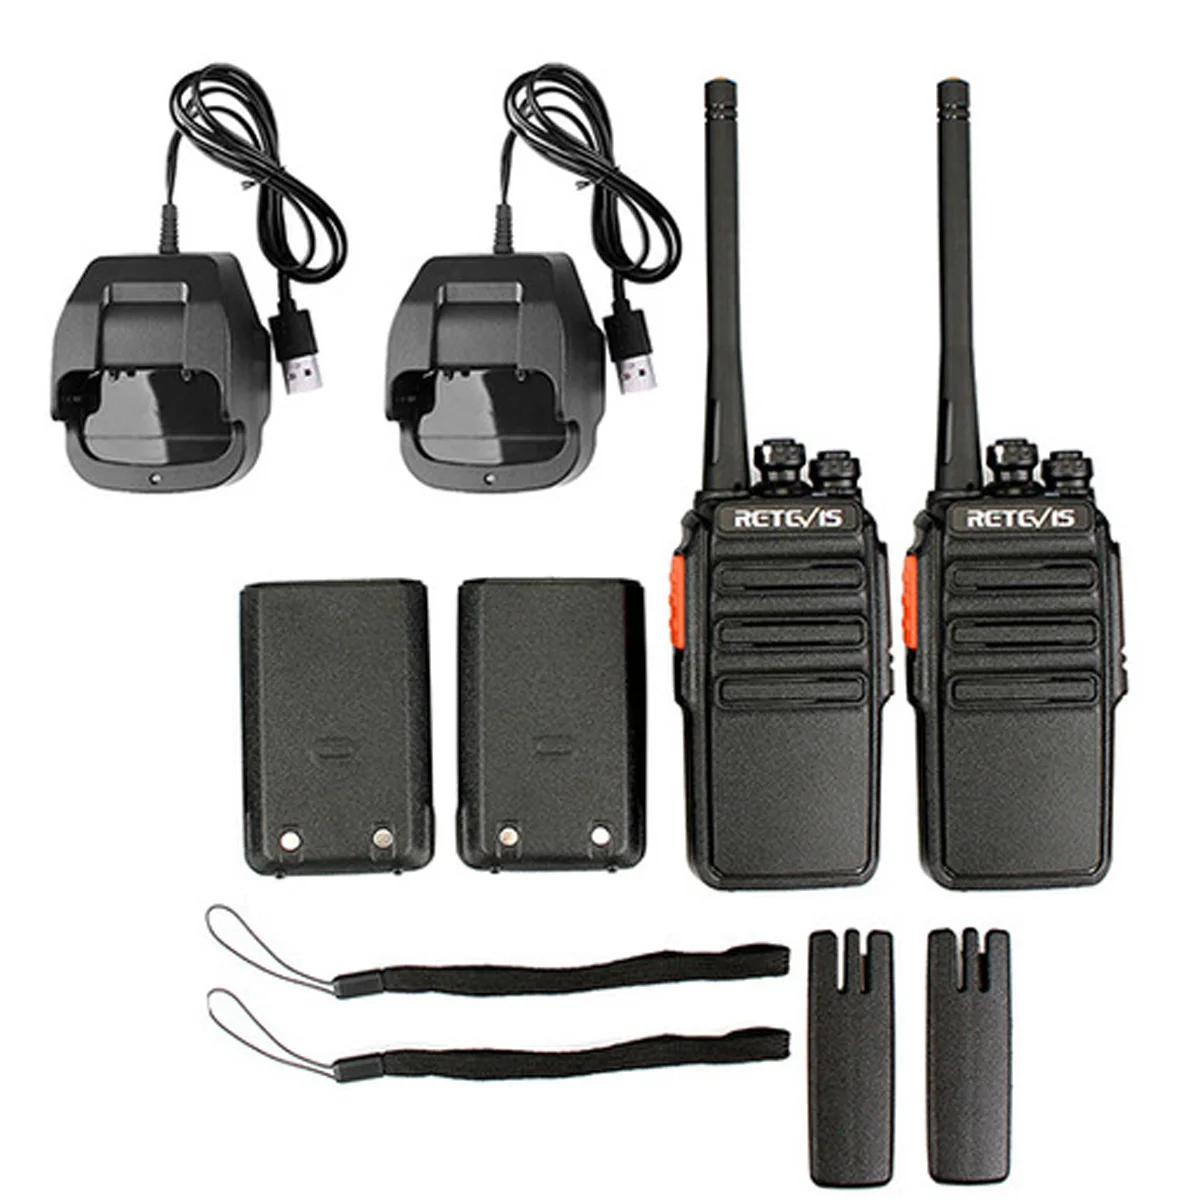 

Retevis RT24 PMR446 Walkie Talkie UHF Licence-Free handheld Two Way Radio 16Channels Scan 0.5W TOT VOX For business Security